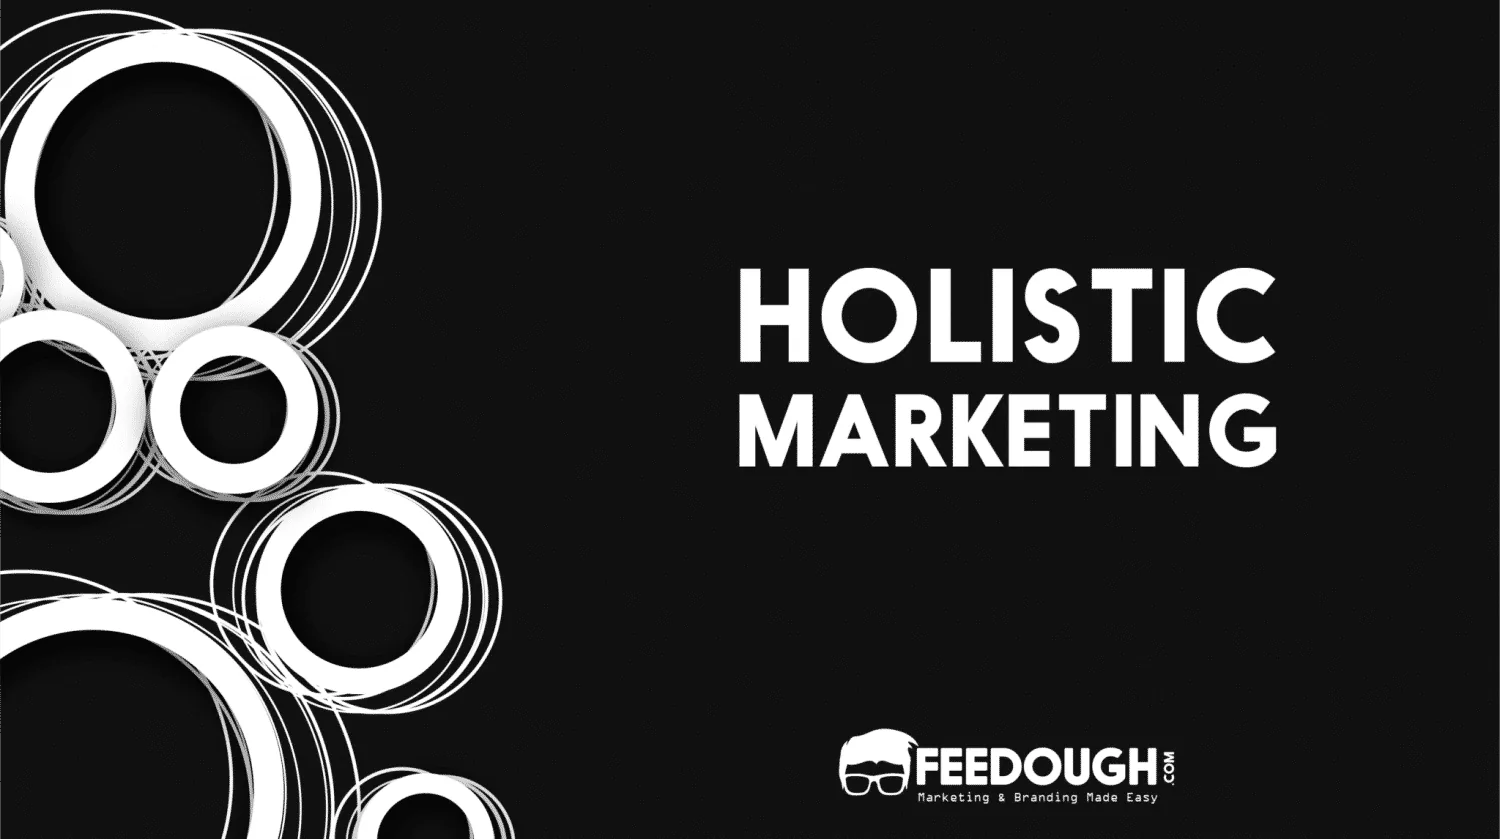 Holistic Marketing – Meaning, Concepts, and Importance